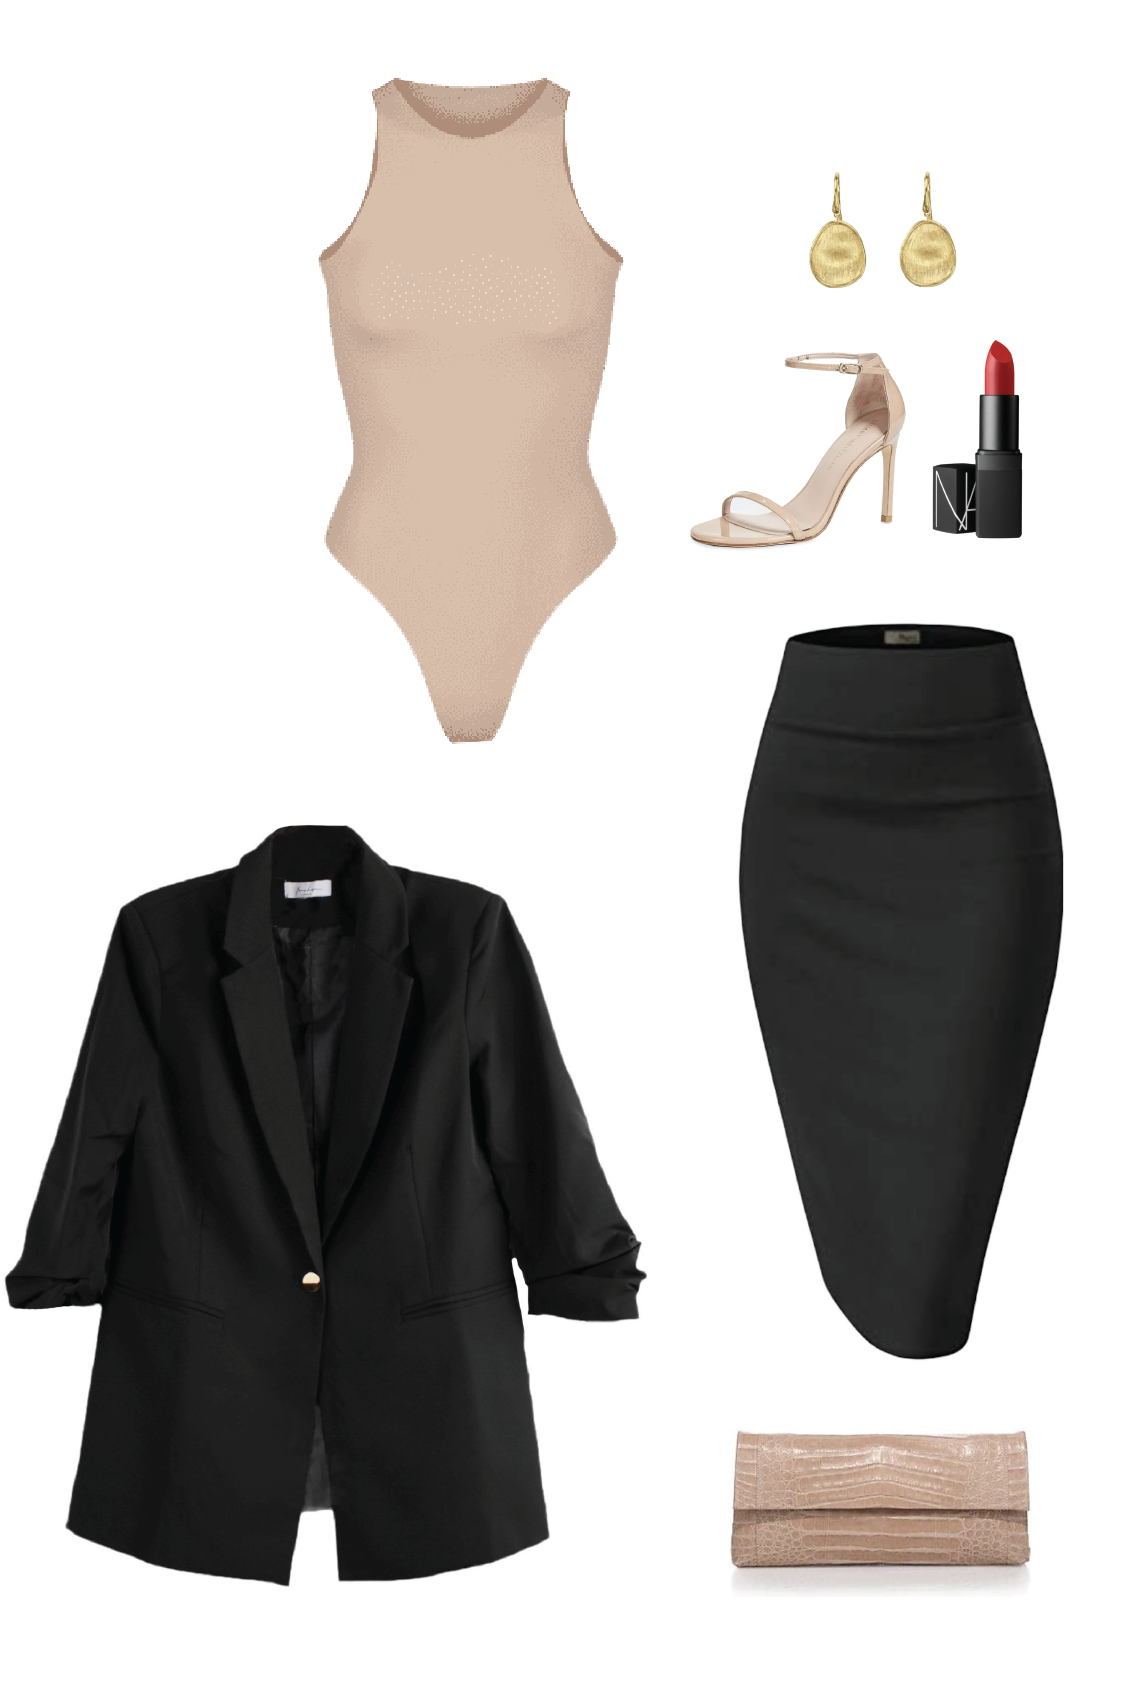 Load image into Gallery viewer, Glow Fashion Boutique Black Pencil Skirt Outfit Ideas
